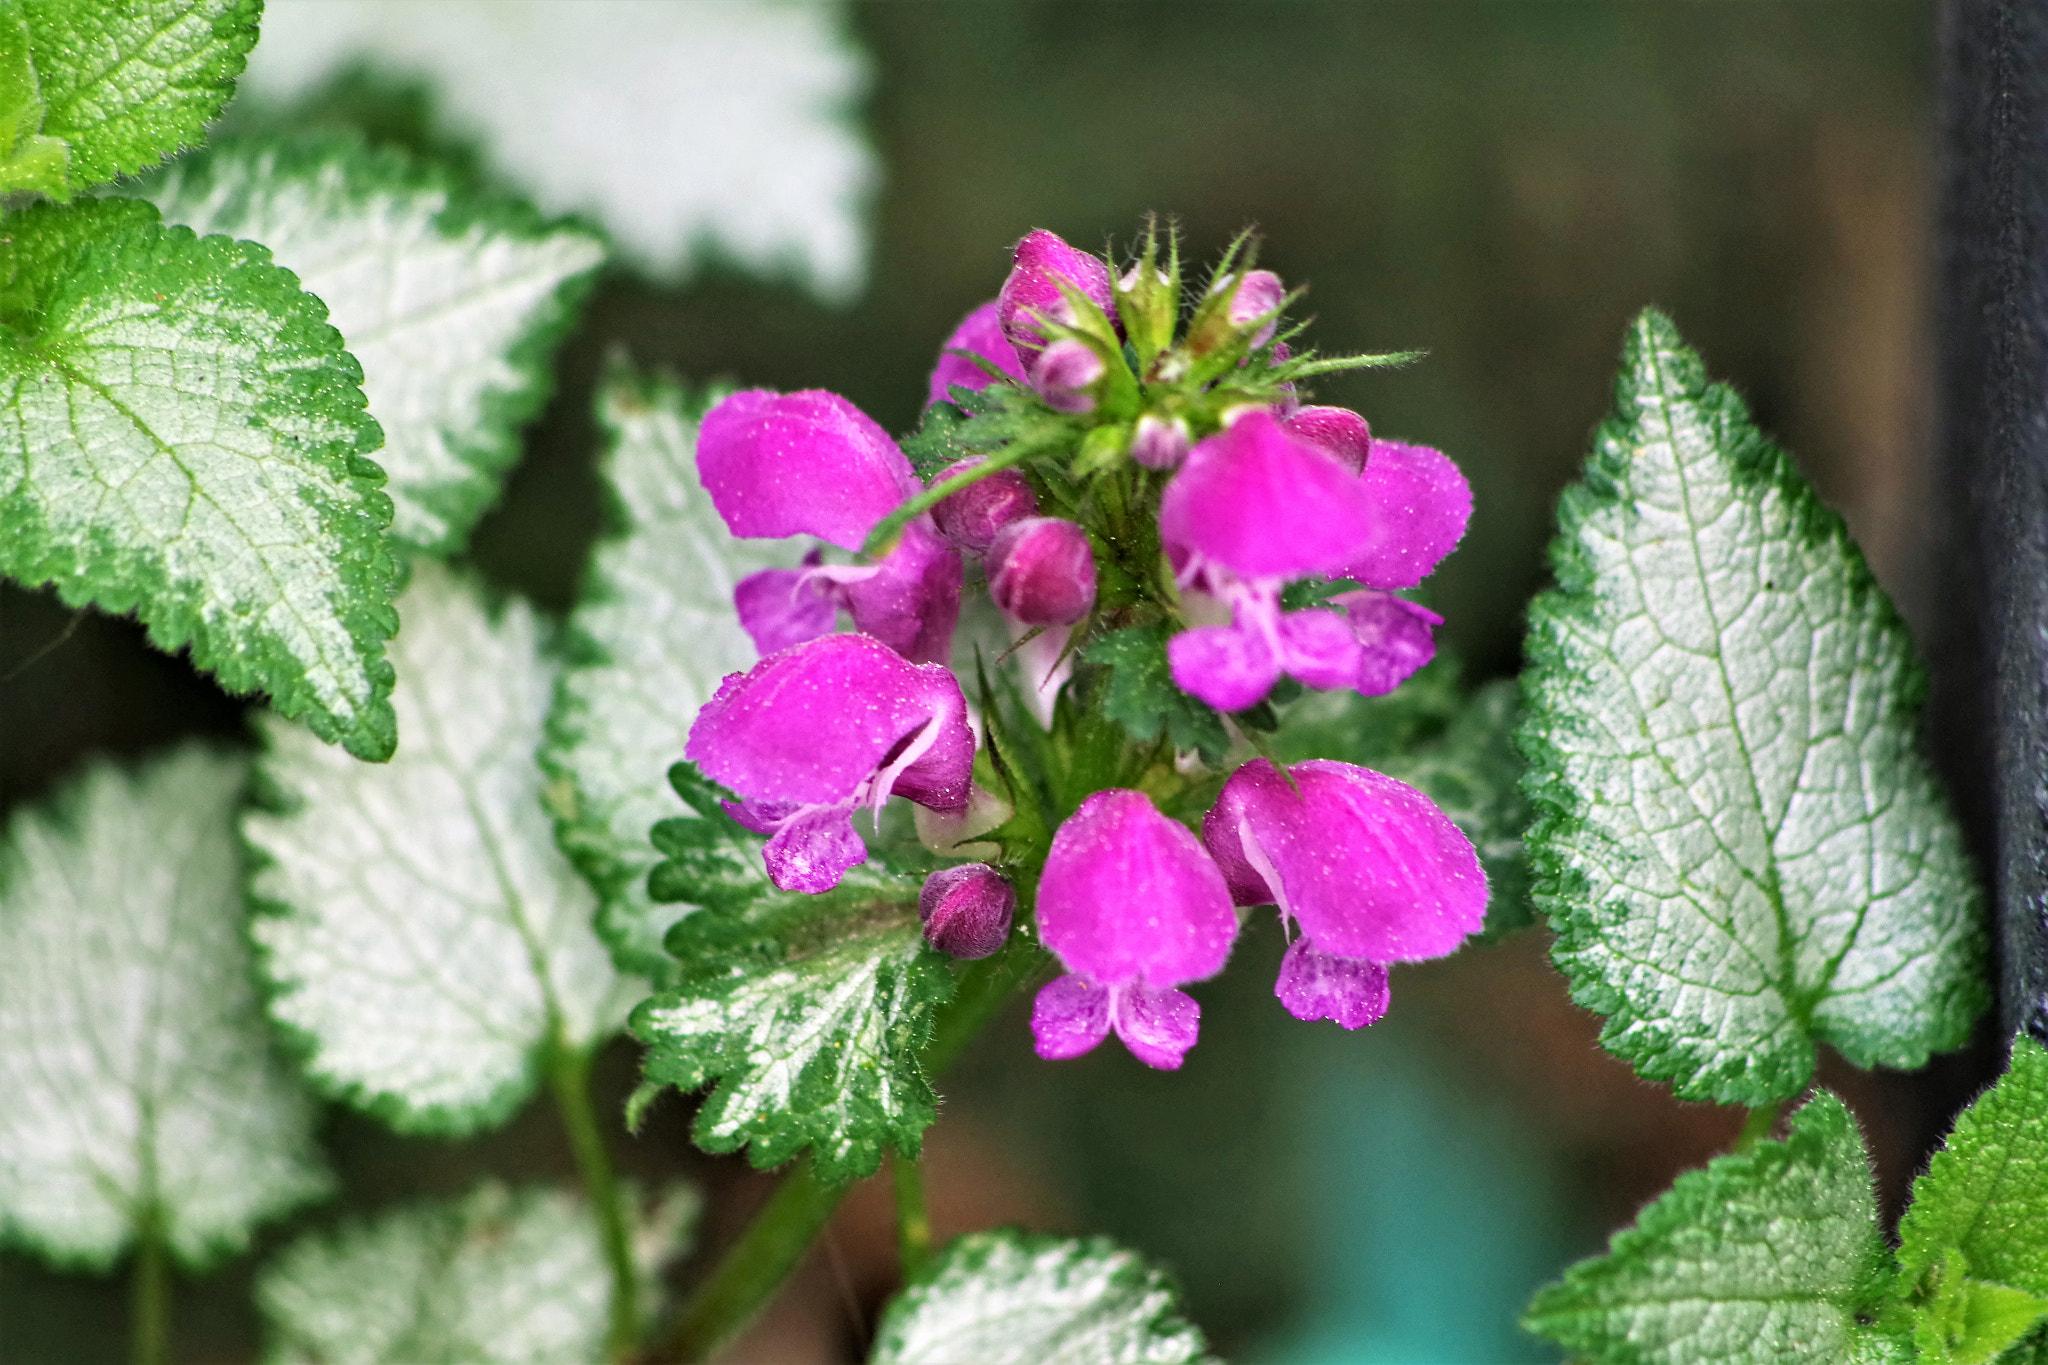 Pentax K-S2 sample photo. Nettle plant in bloom photography